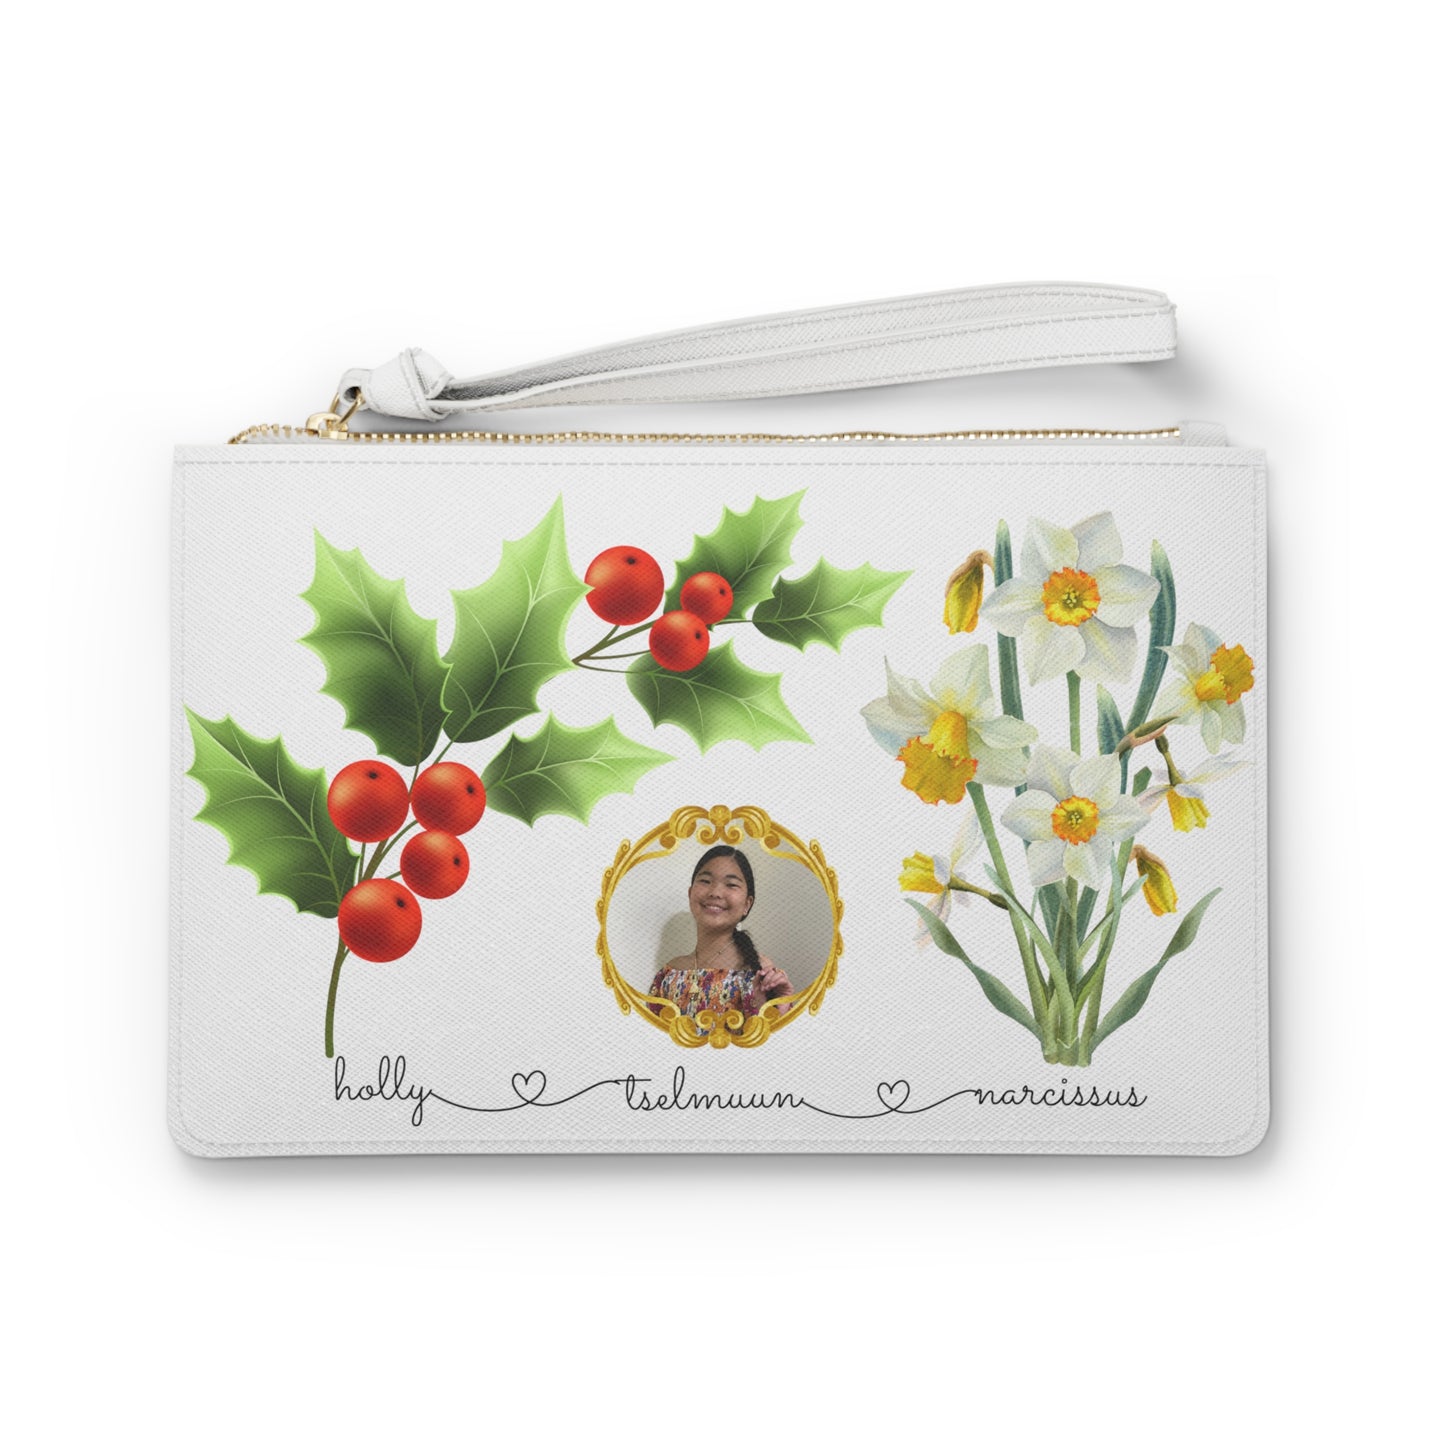 Clutch Bag for a girl with her name & photo